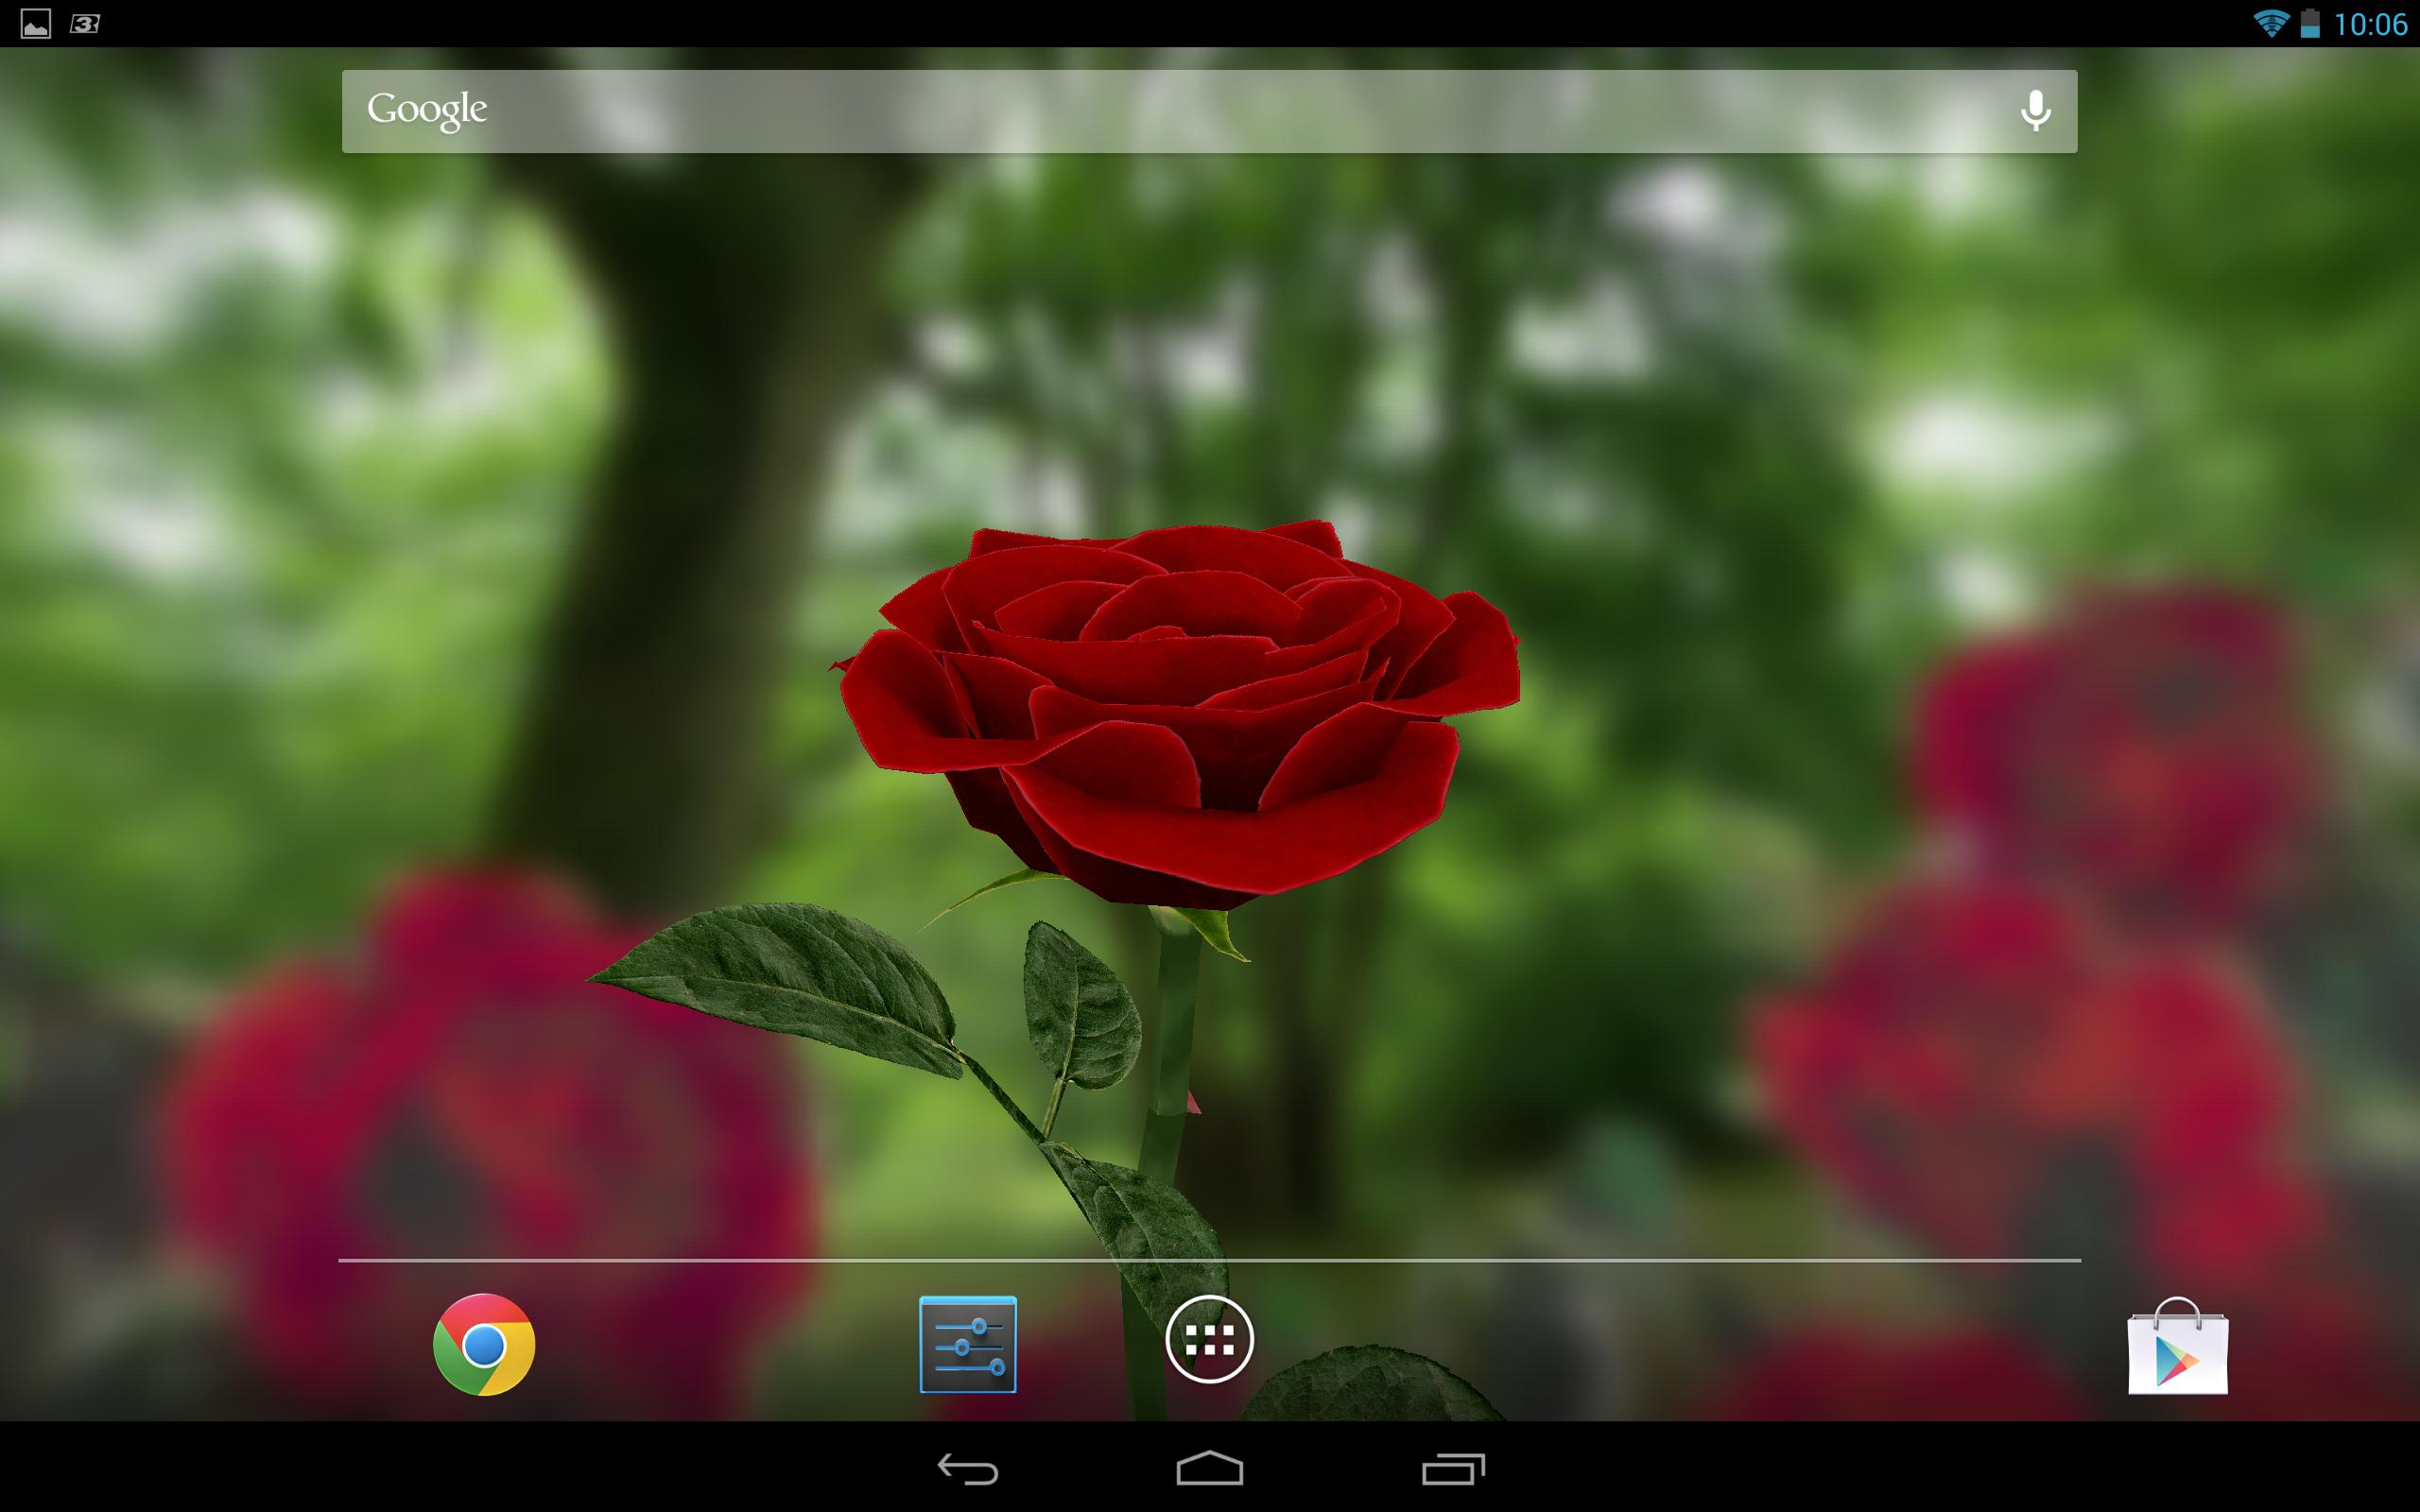 3D Rose Live Wallpaper Free for Android - APK Download